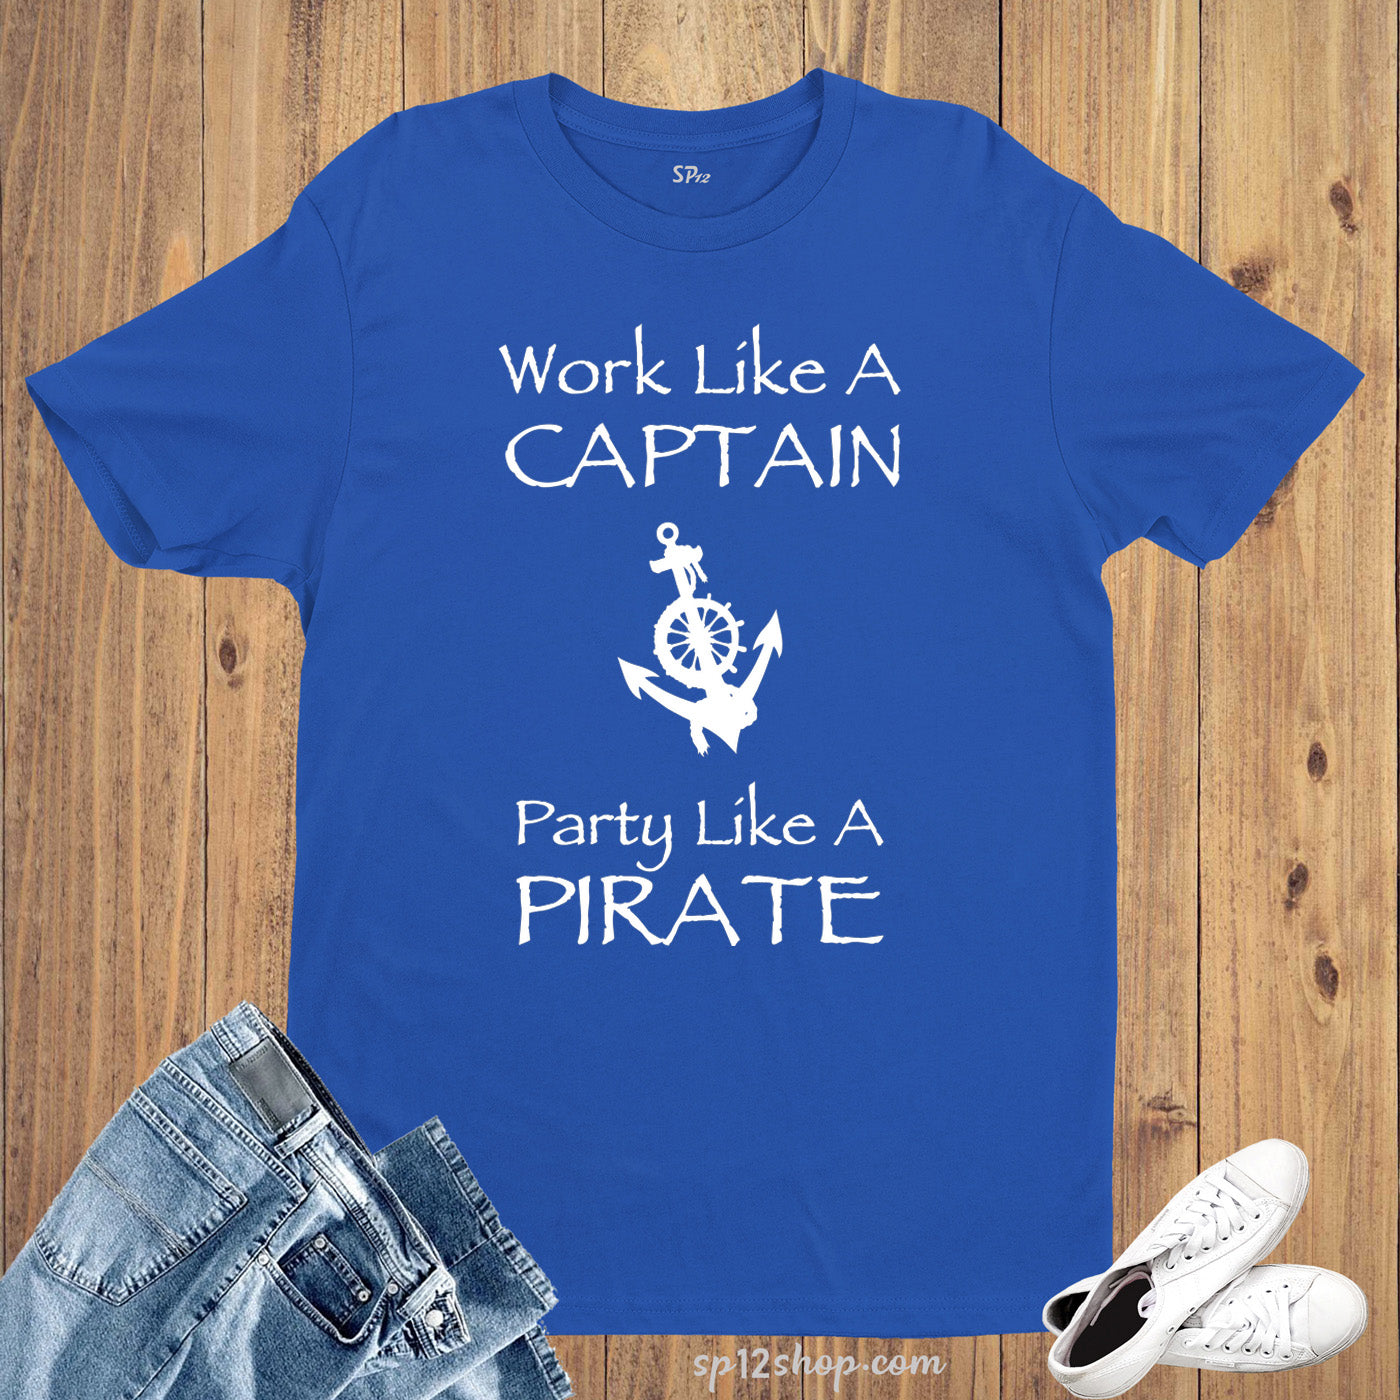 Slogan T Shirt Work Like A Captain Party Like Pirate Expression